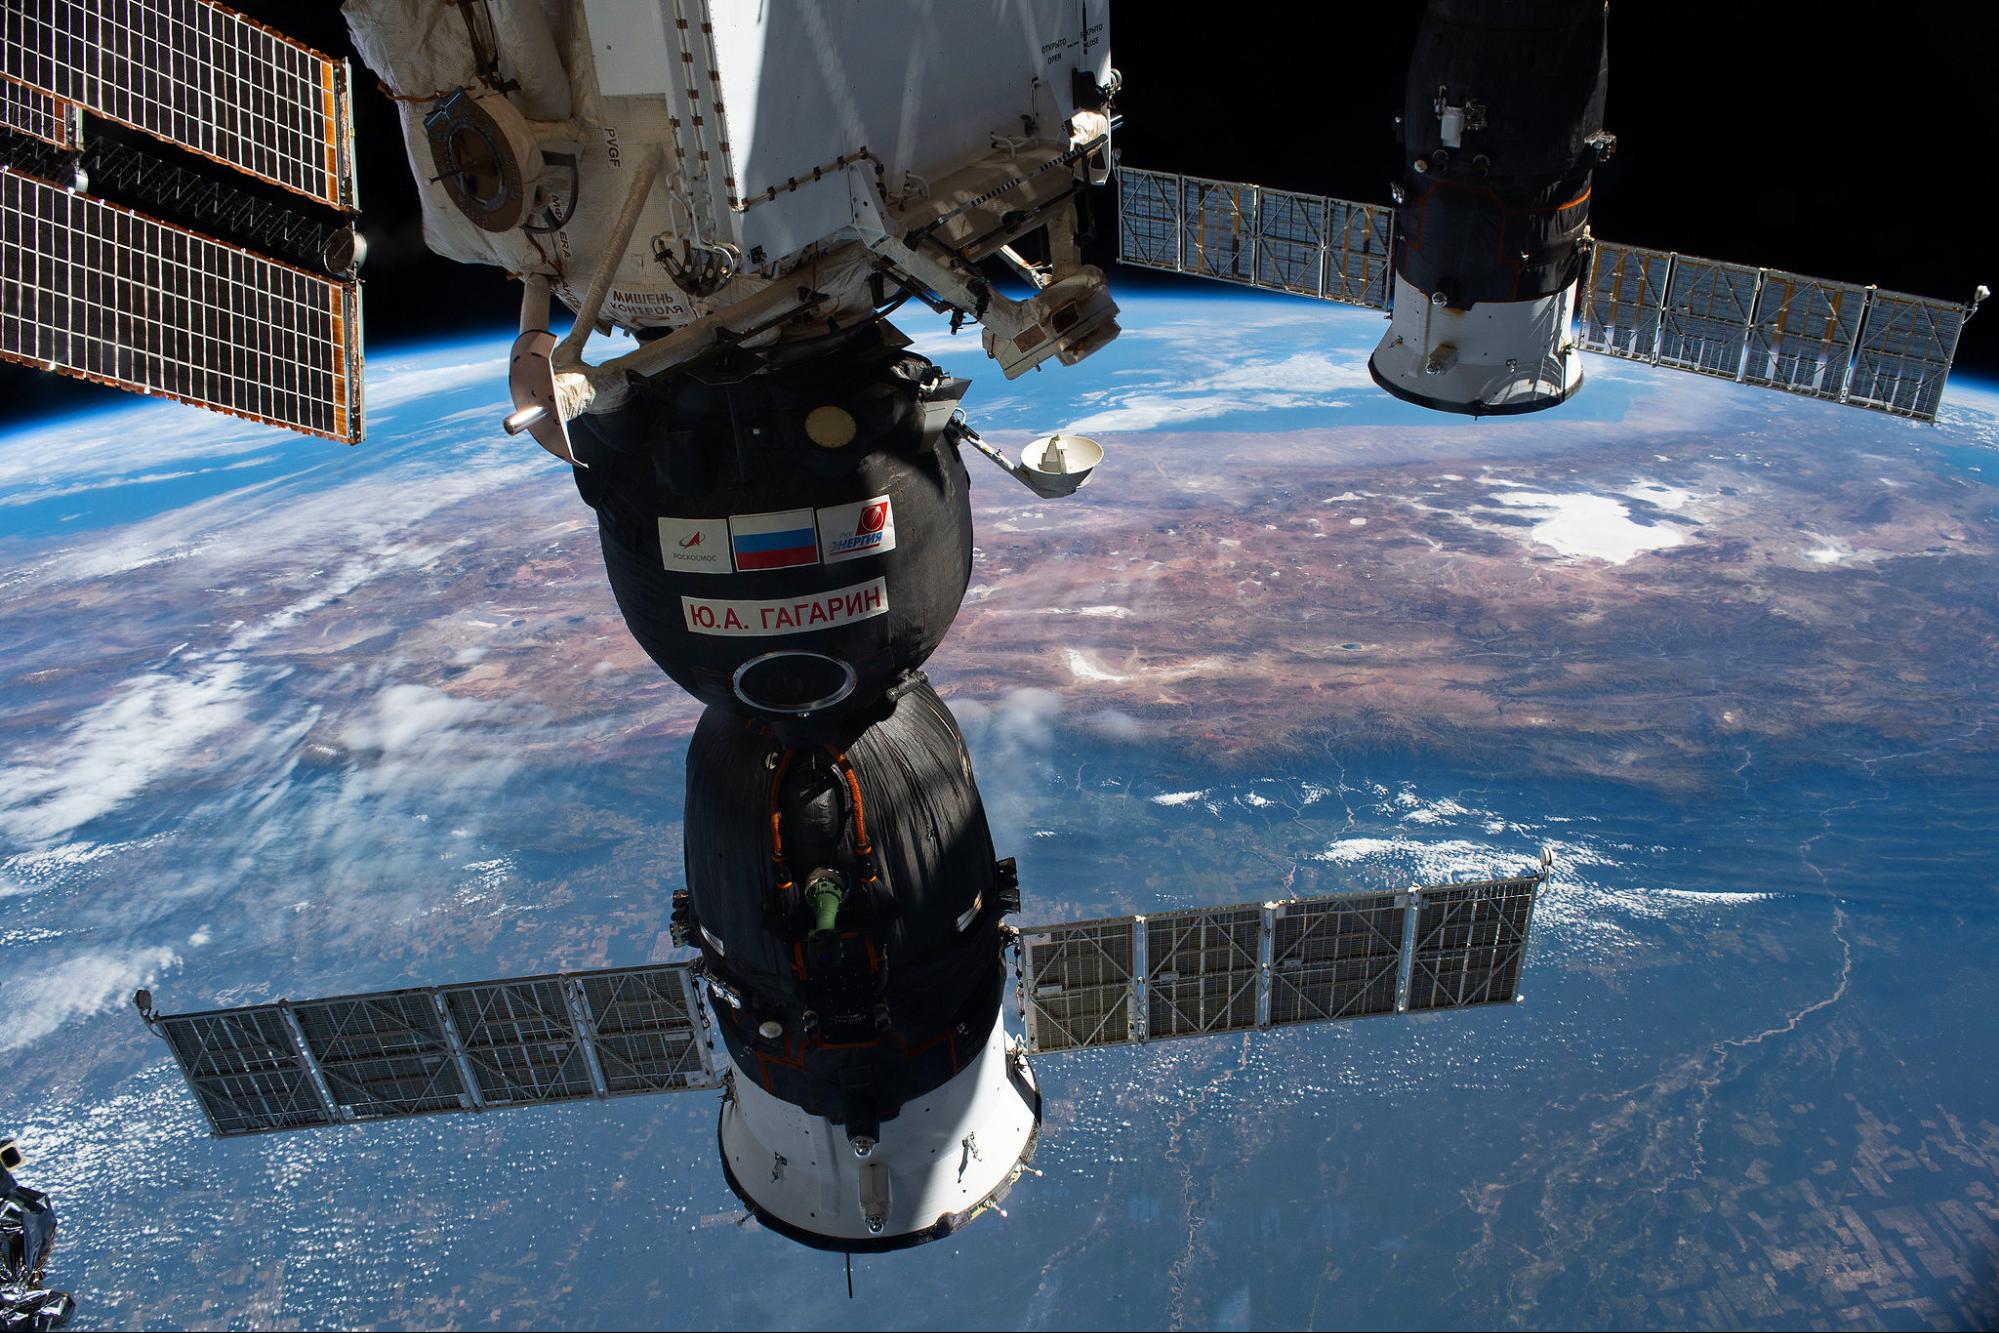 New Cosmonaut Photos Show International Space Station From Rare Perspective